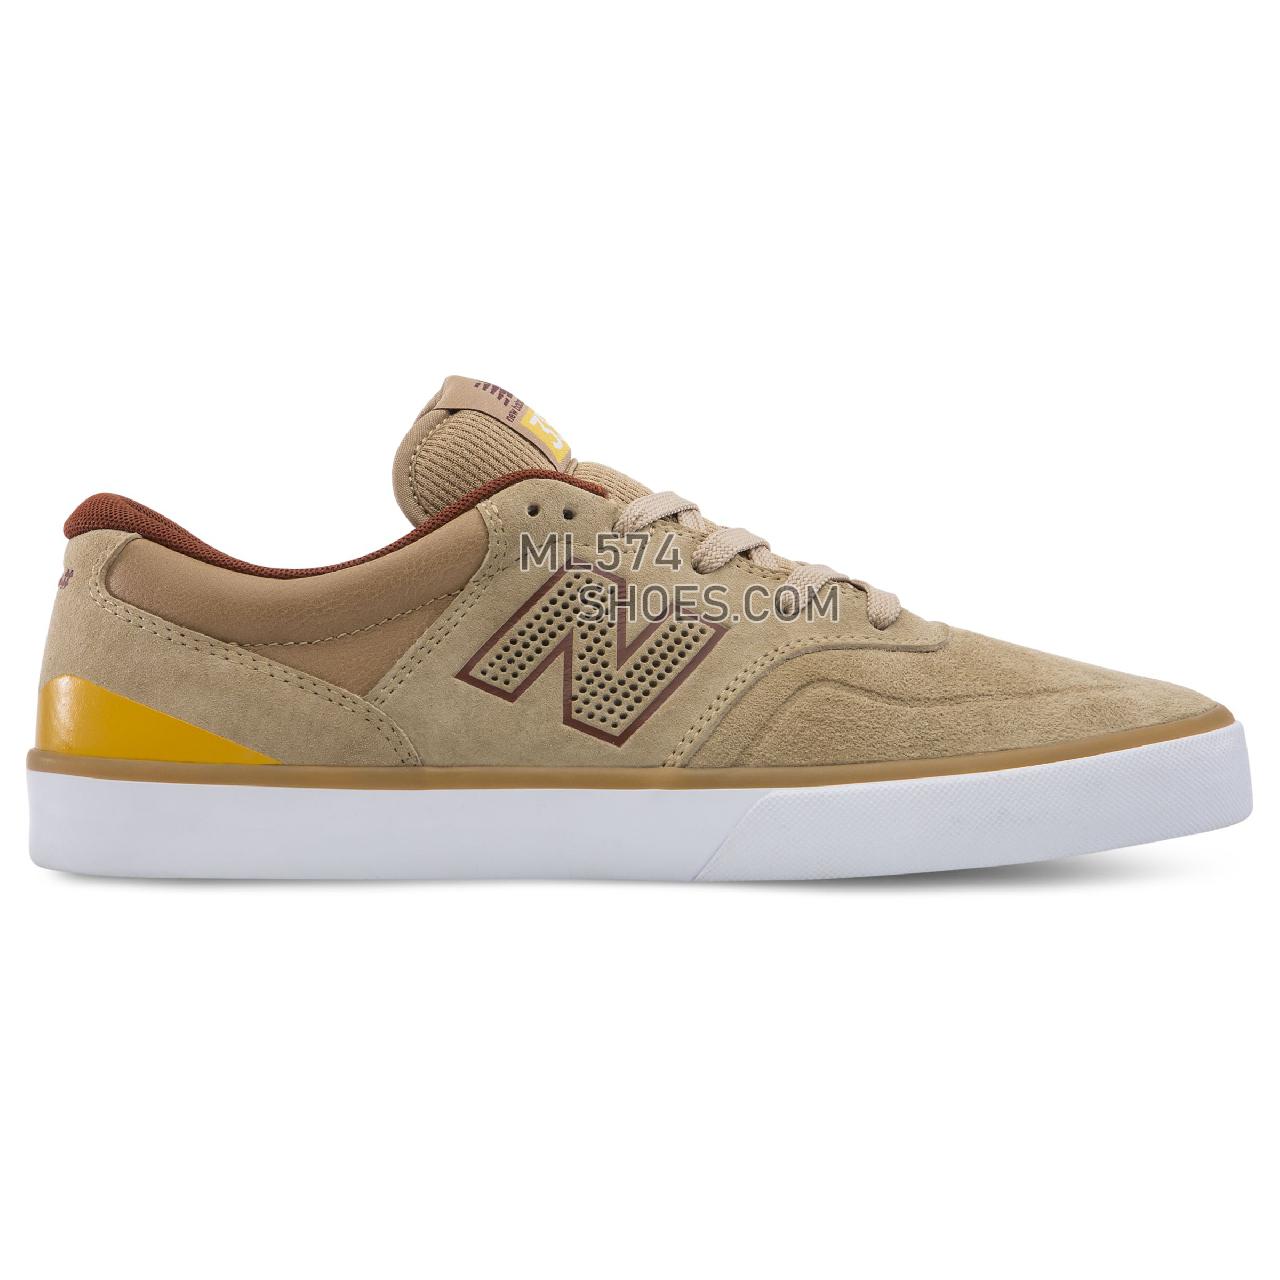 New Balance Arto 358 - Men's 358 - Classic Tan with Red - NM358TYW